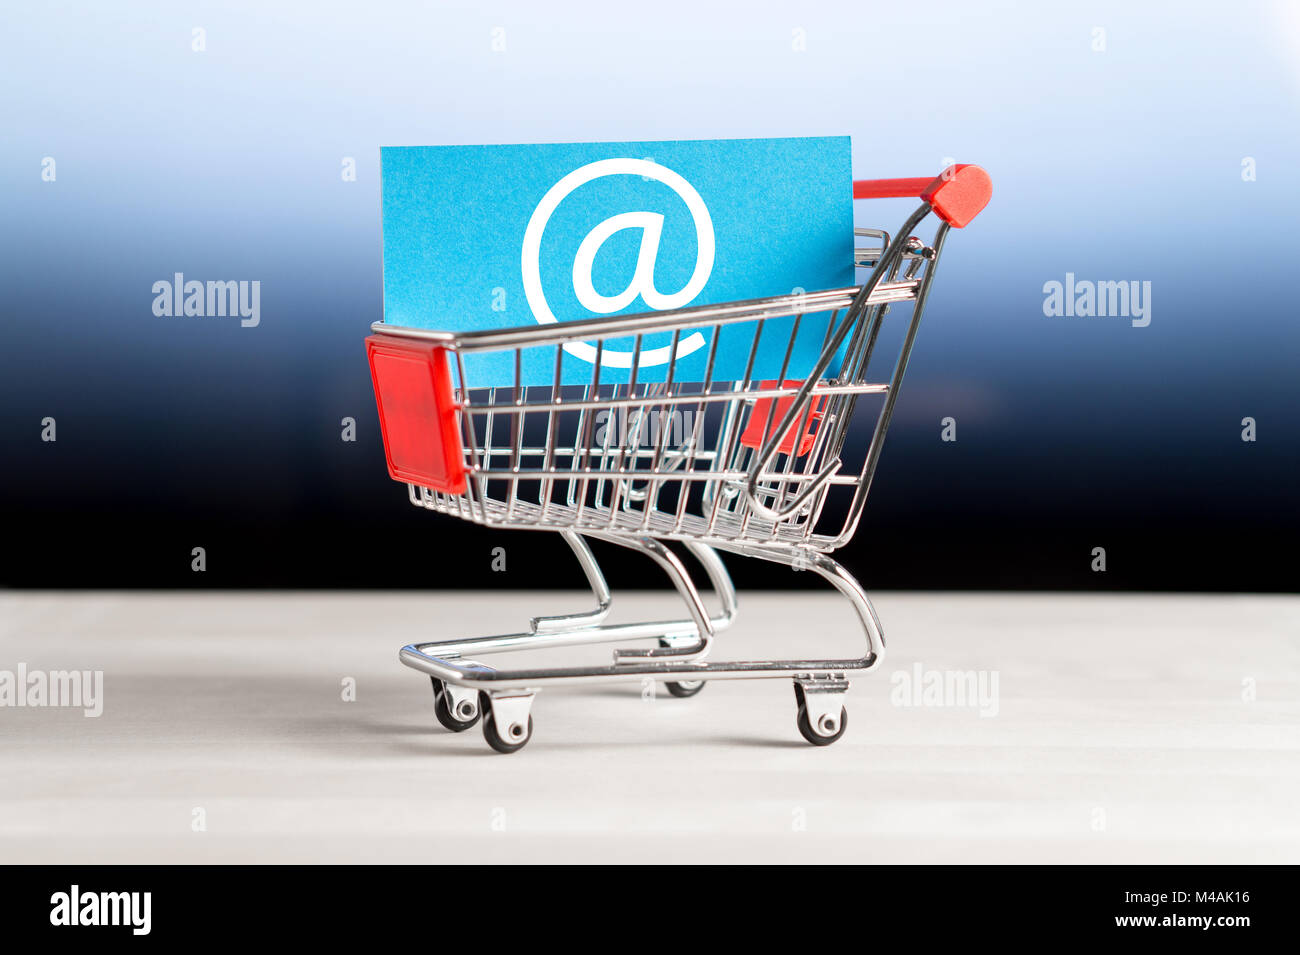 Online shopping, e commerce and internet store concept. Newsletter and email marketing. Miniature shopping cart with at sign. Stock Photo